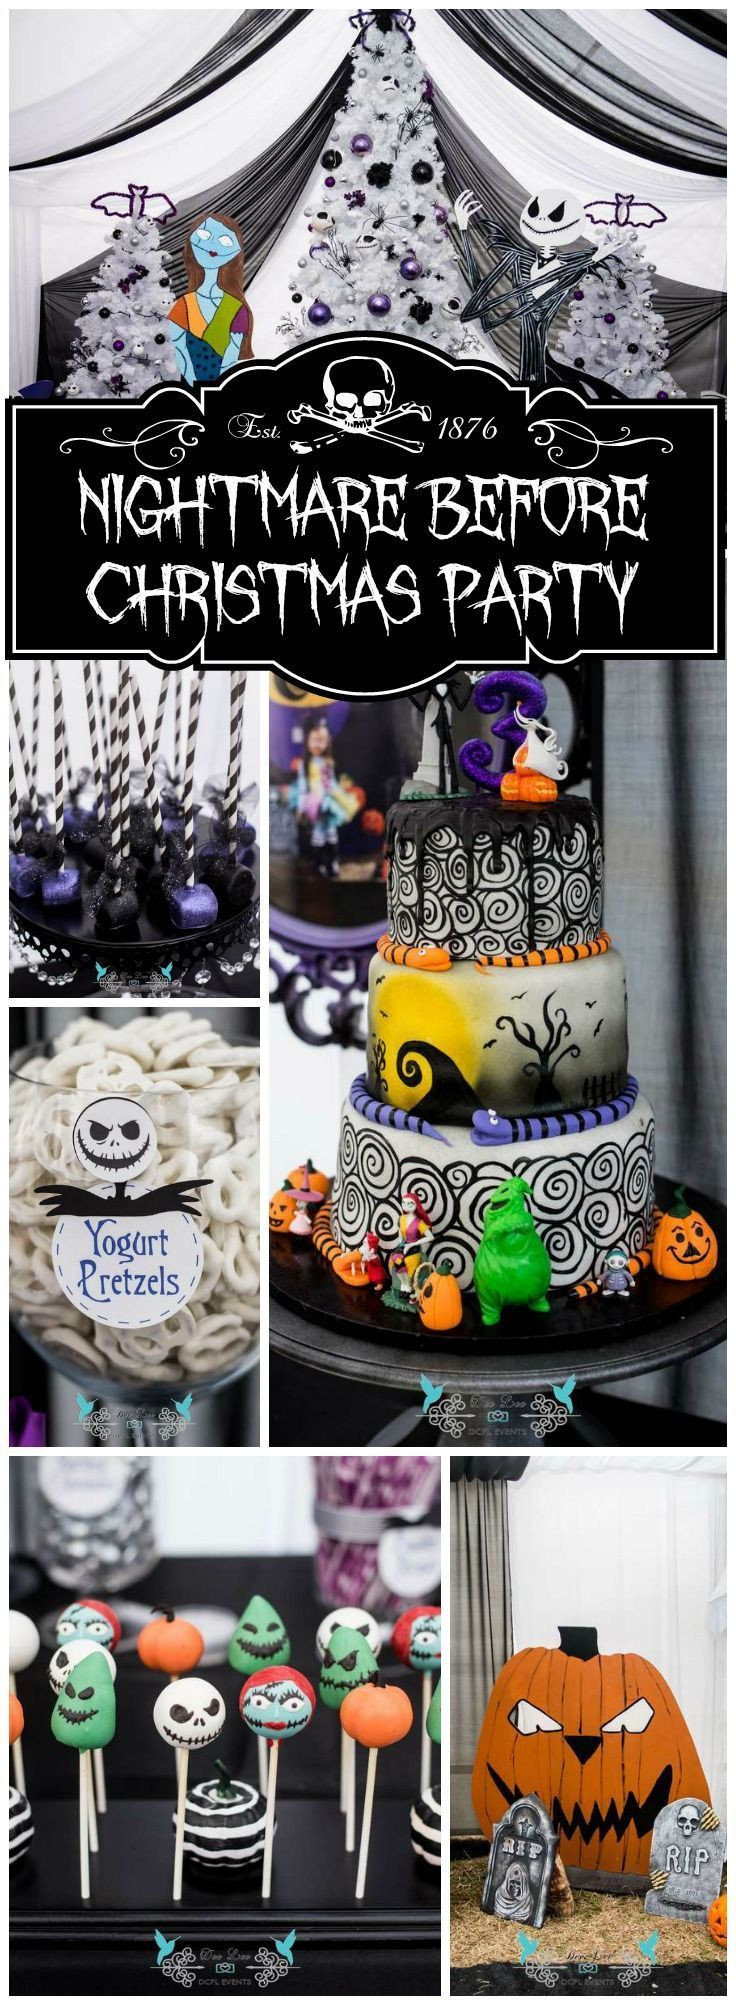 The Nightmare Before Christmas Birthday Party Ideas
 Pin on DIY Entertaining Party Supplies